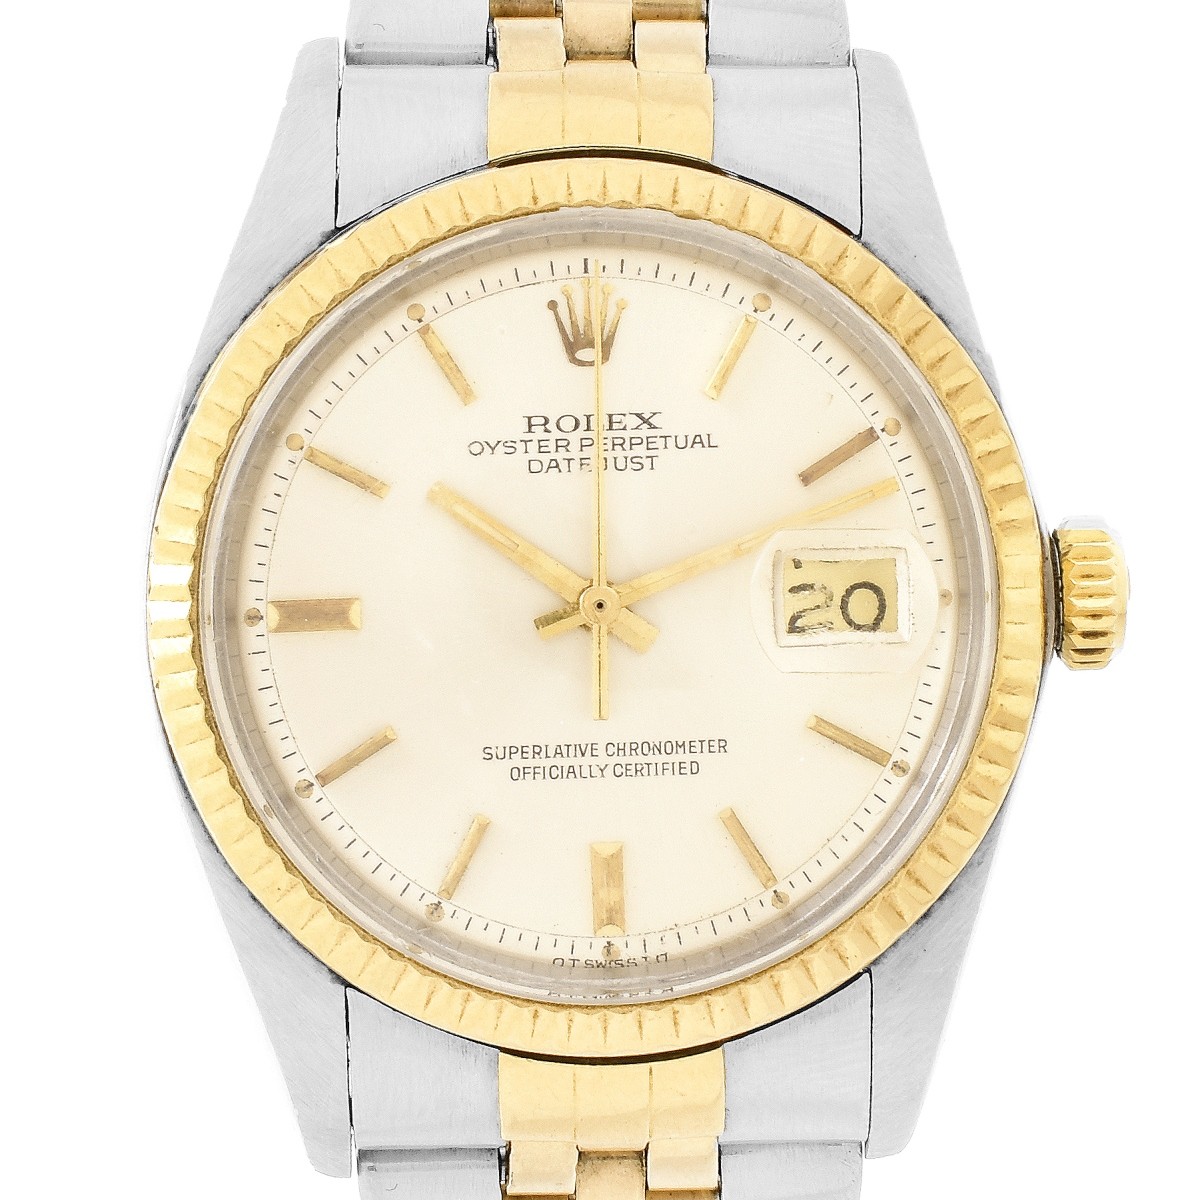 Man's Rolex Two Tone Date Just Watch